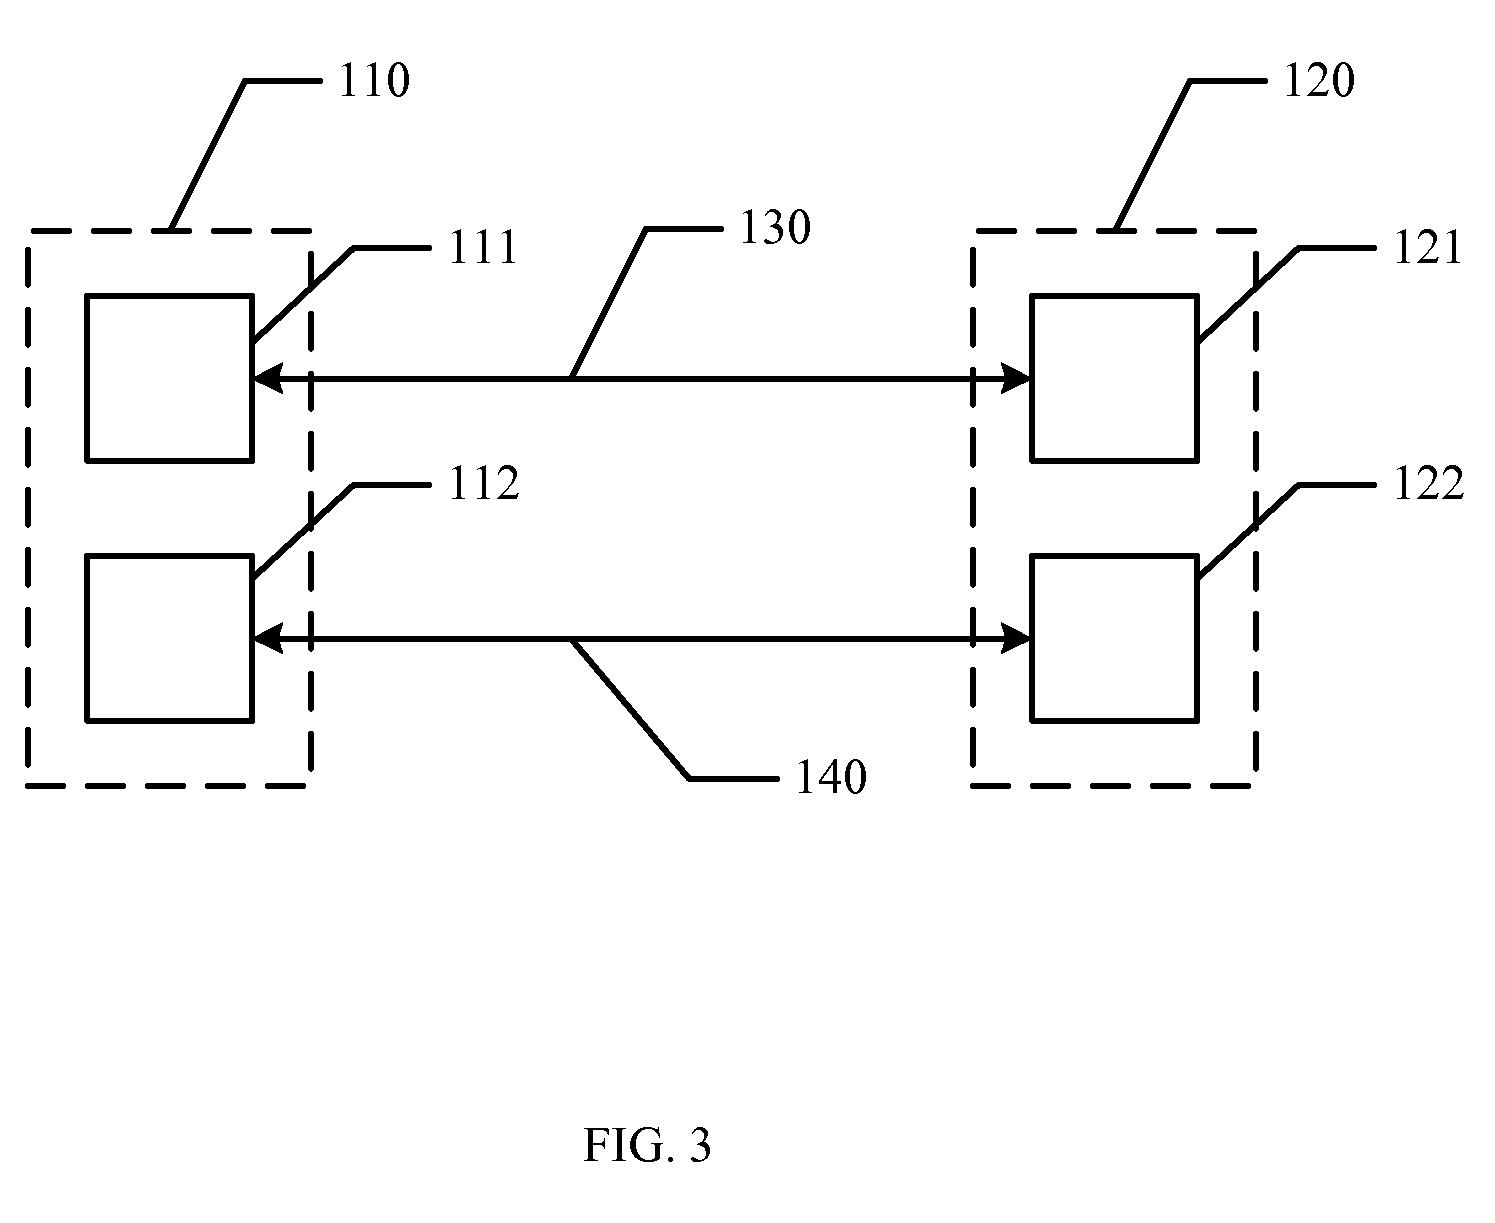 Method And System For Messaging And Communication Based On Groups